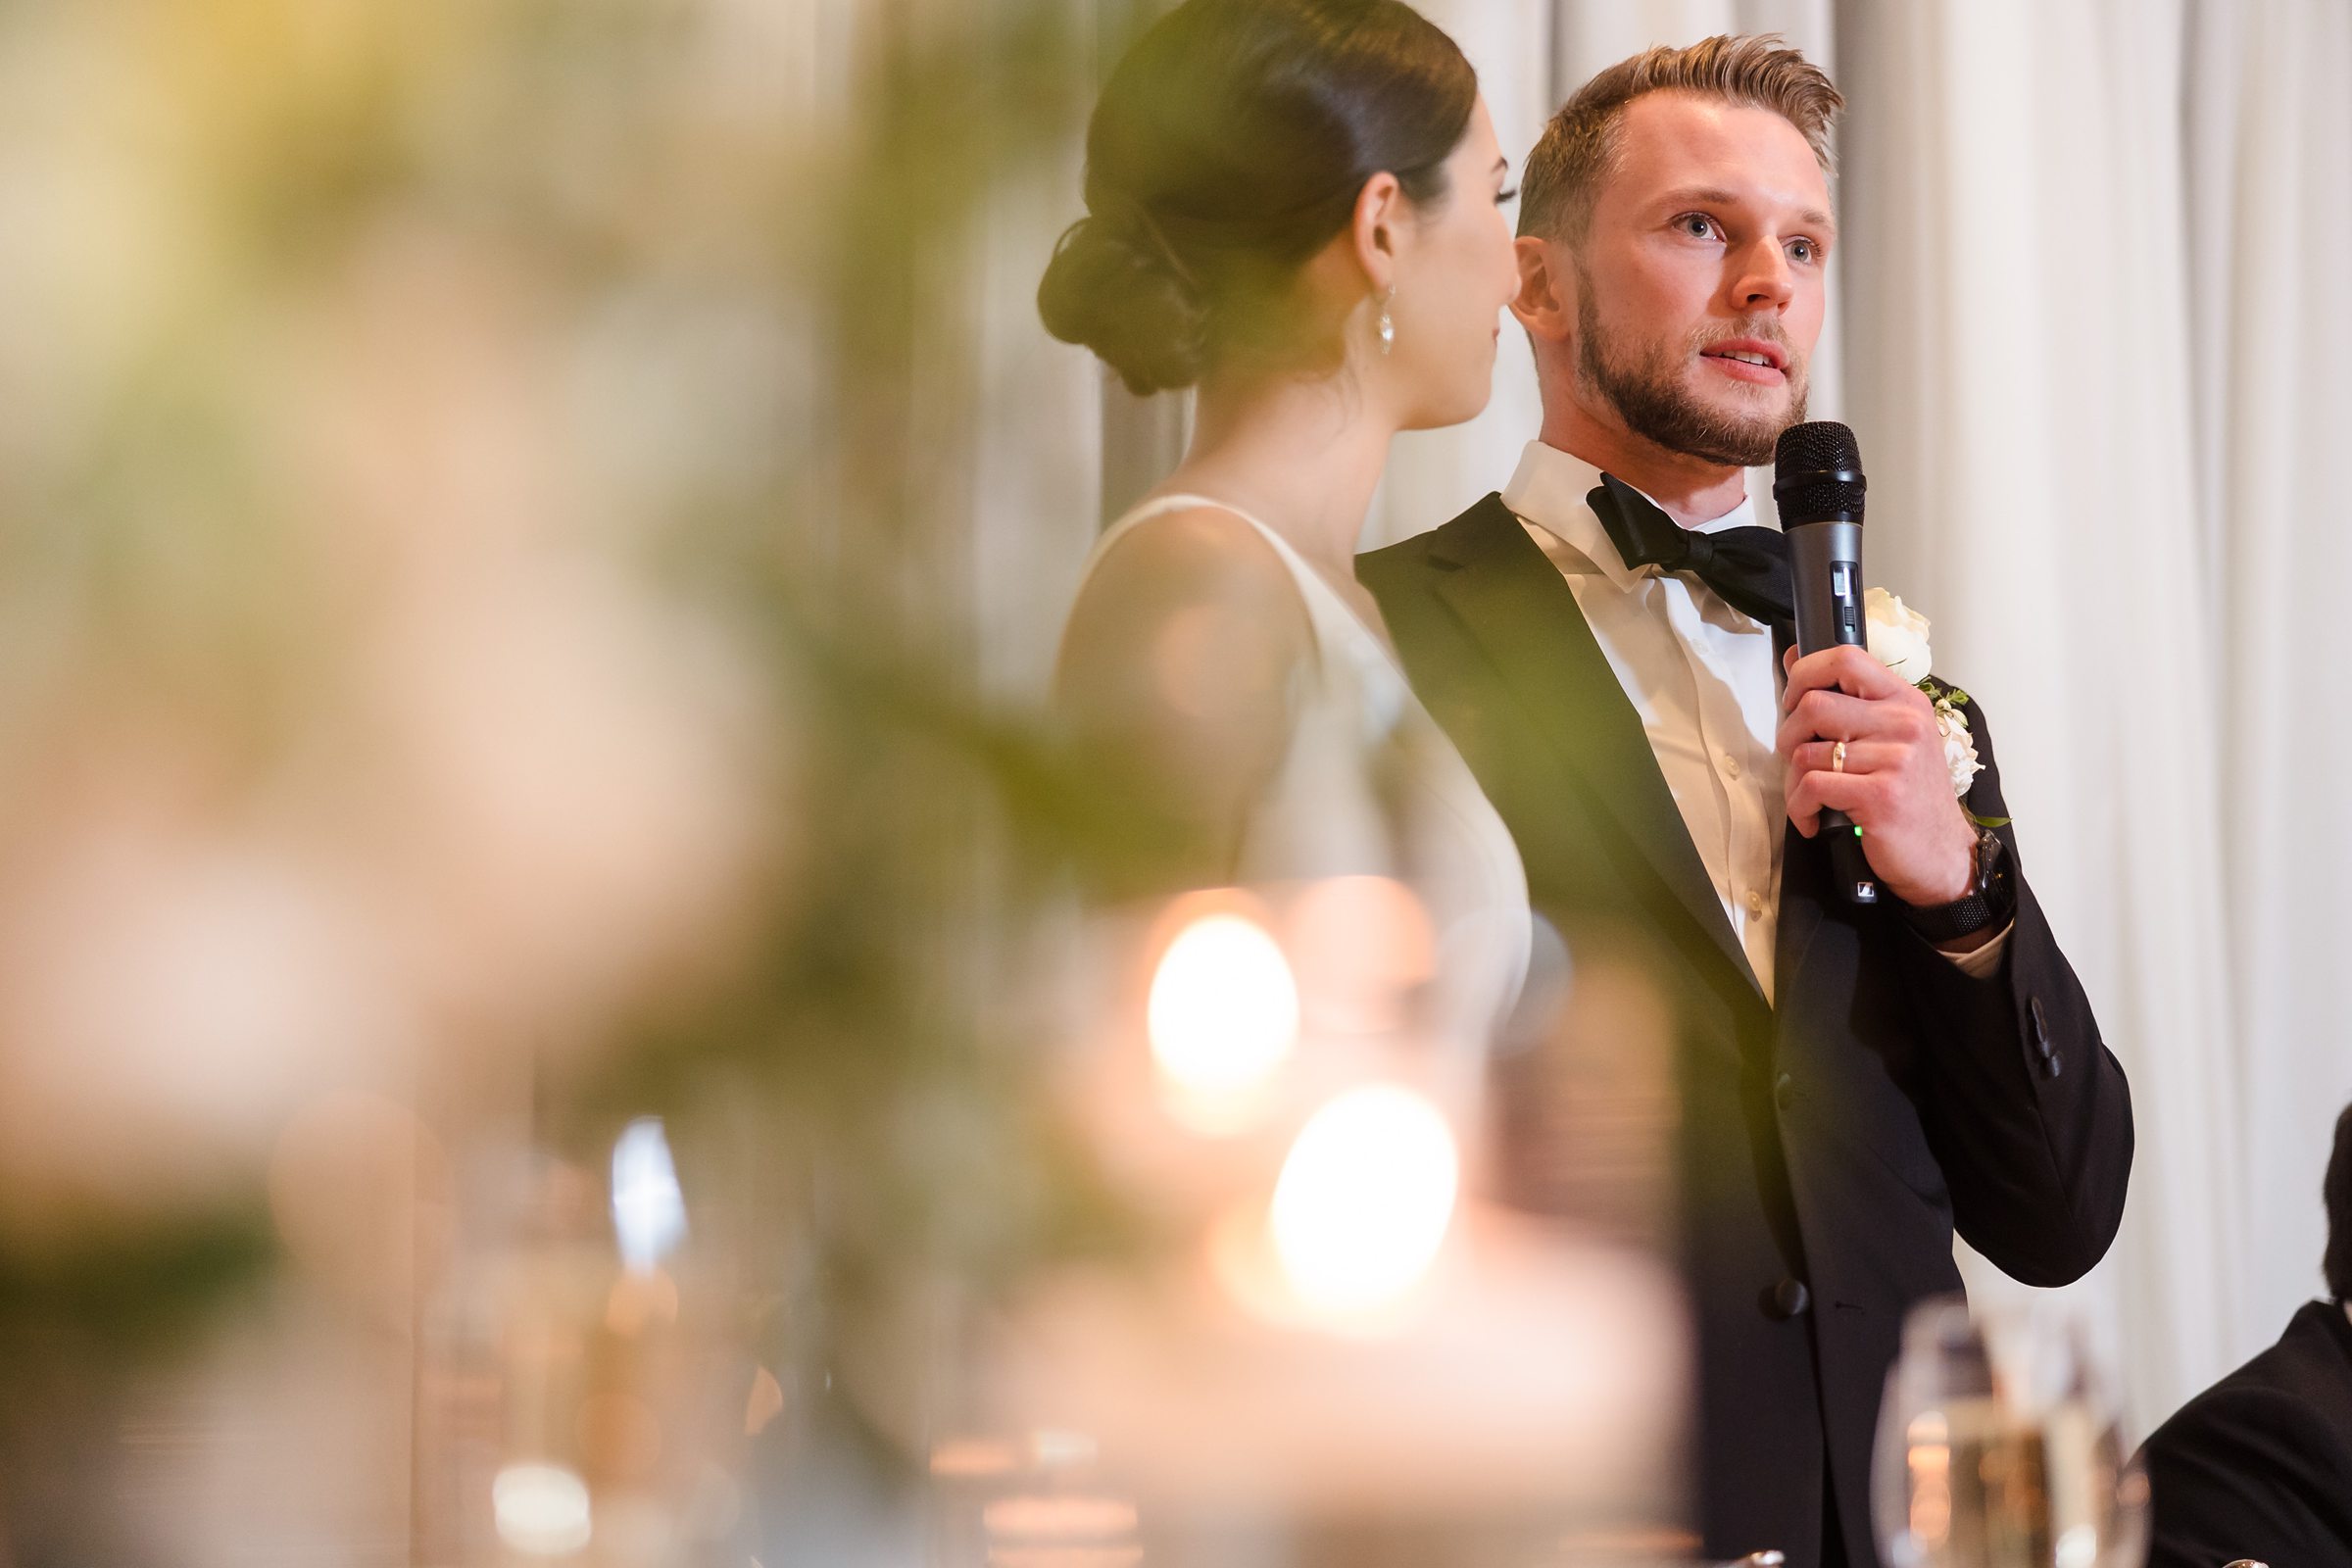 Groom shares a heartfelt speech during a wedding at the Chevy Chase Country Club in Wheeling, Illinois.